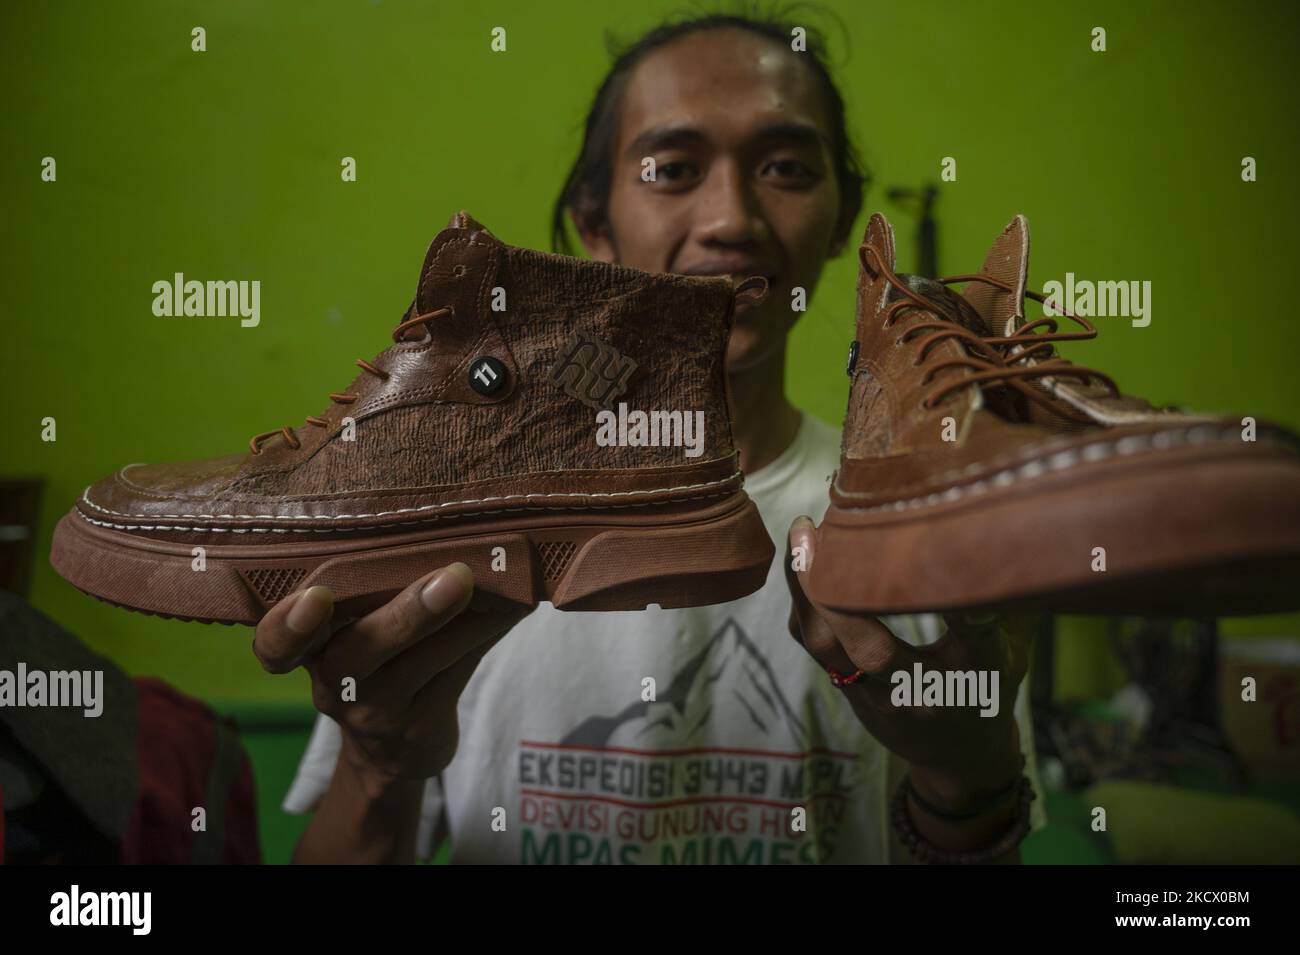 Imran, a small business actor shows shoes made of bark in Sidera Village, Sigi Regency, Central Sulawesi Province, Indonesia on November 29, 2021. Products made from bark that have been used by indigenous people in the local area have begun to be abandoned and shifted to to synthetic products. Imran makes innovations by designing various products from bark such as bags, shoes, shirts, backpacks to watches. The innovation is carried out so that the preservation of local cultural values ??in the region can be maintained. These innovative products are currently not mass-produced to avoid clearing Stock Photo